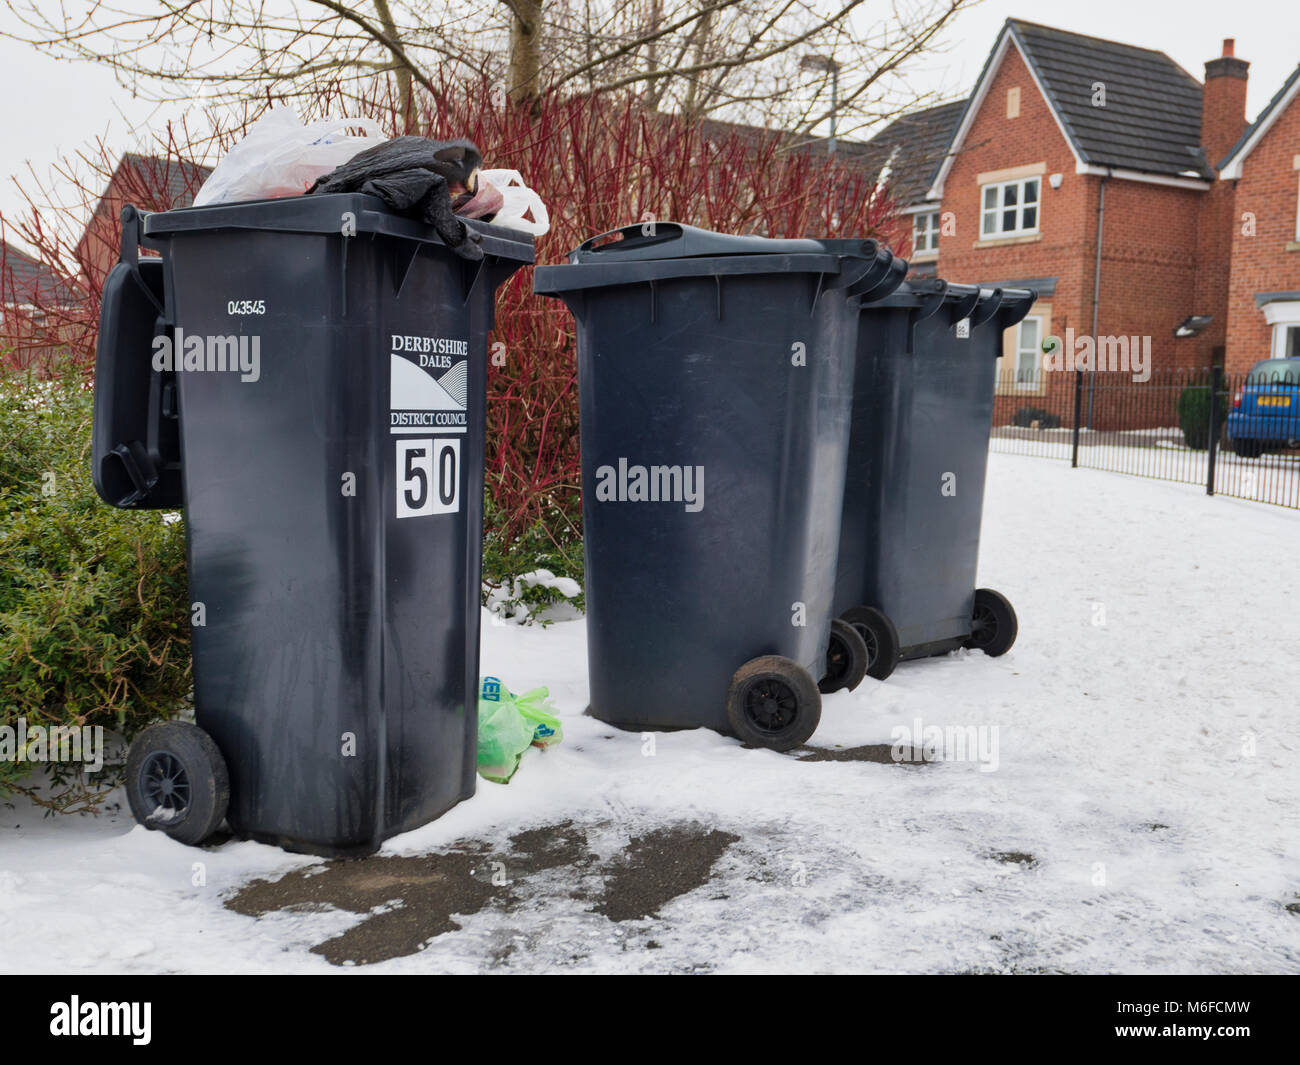 Ashourne, Derbyshire. 3rd March 2018. UK Weather: overflowing bins from Thursday awaiting collection by Derbyshire Dales District Council as they catch up on bin collections after the cold snowy weather in Ashbourne, Derbyshire, England, UK Credit: Doug Blane/Alamy Live News Stock Photo